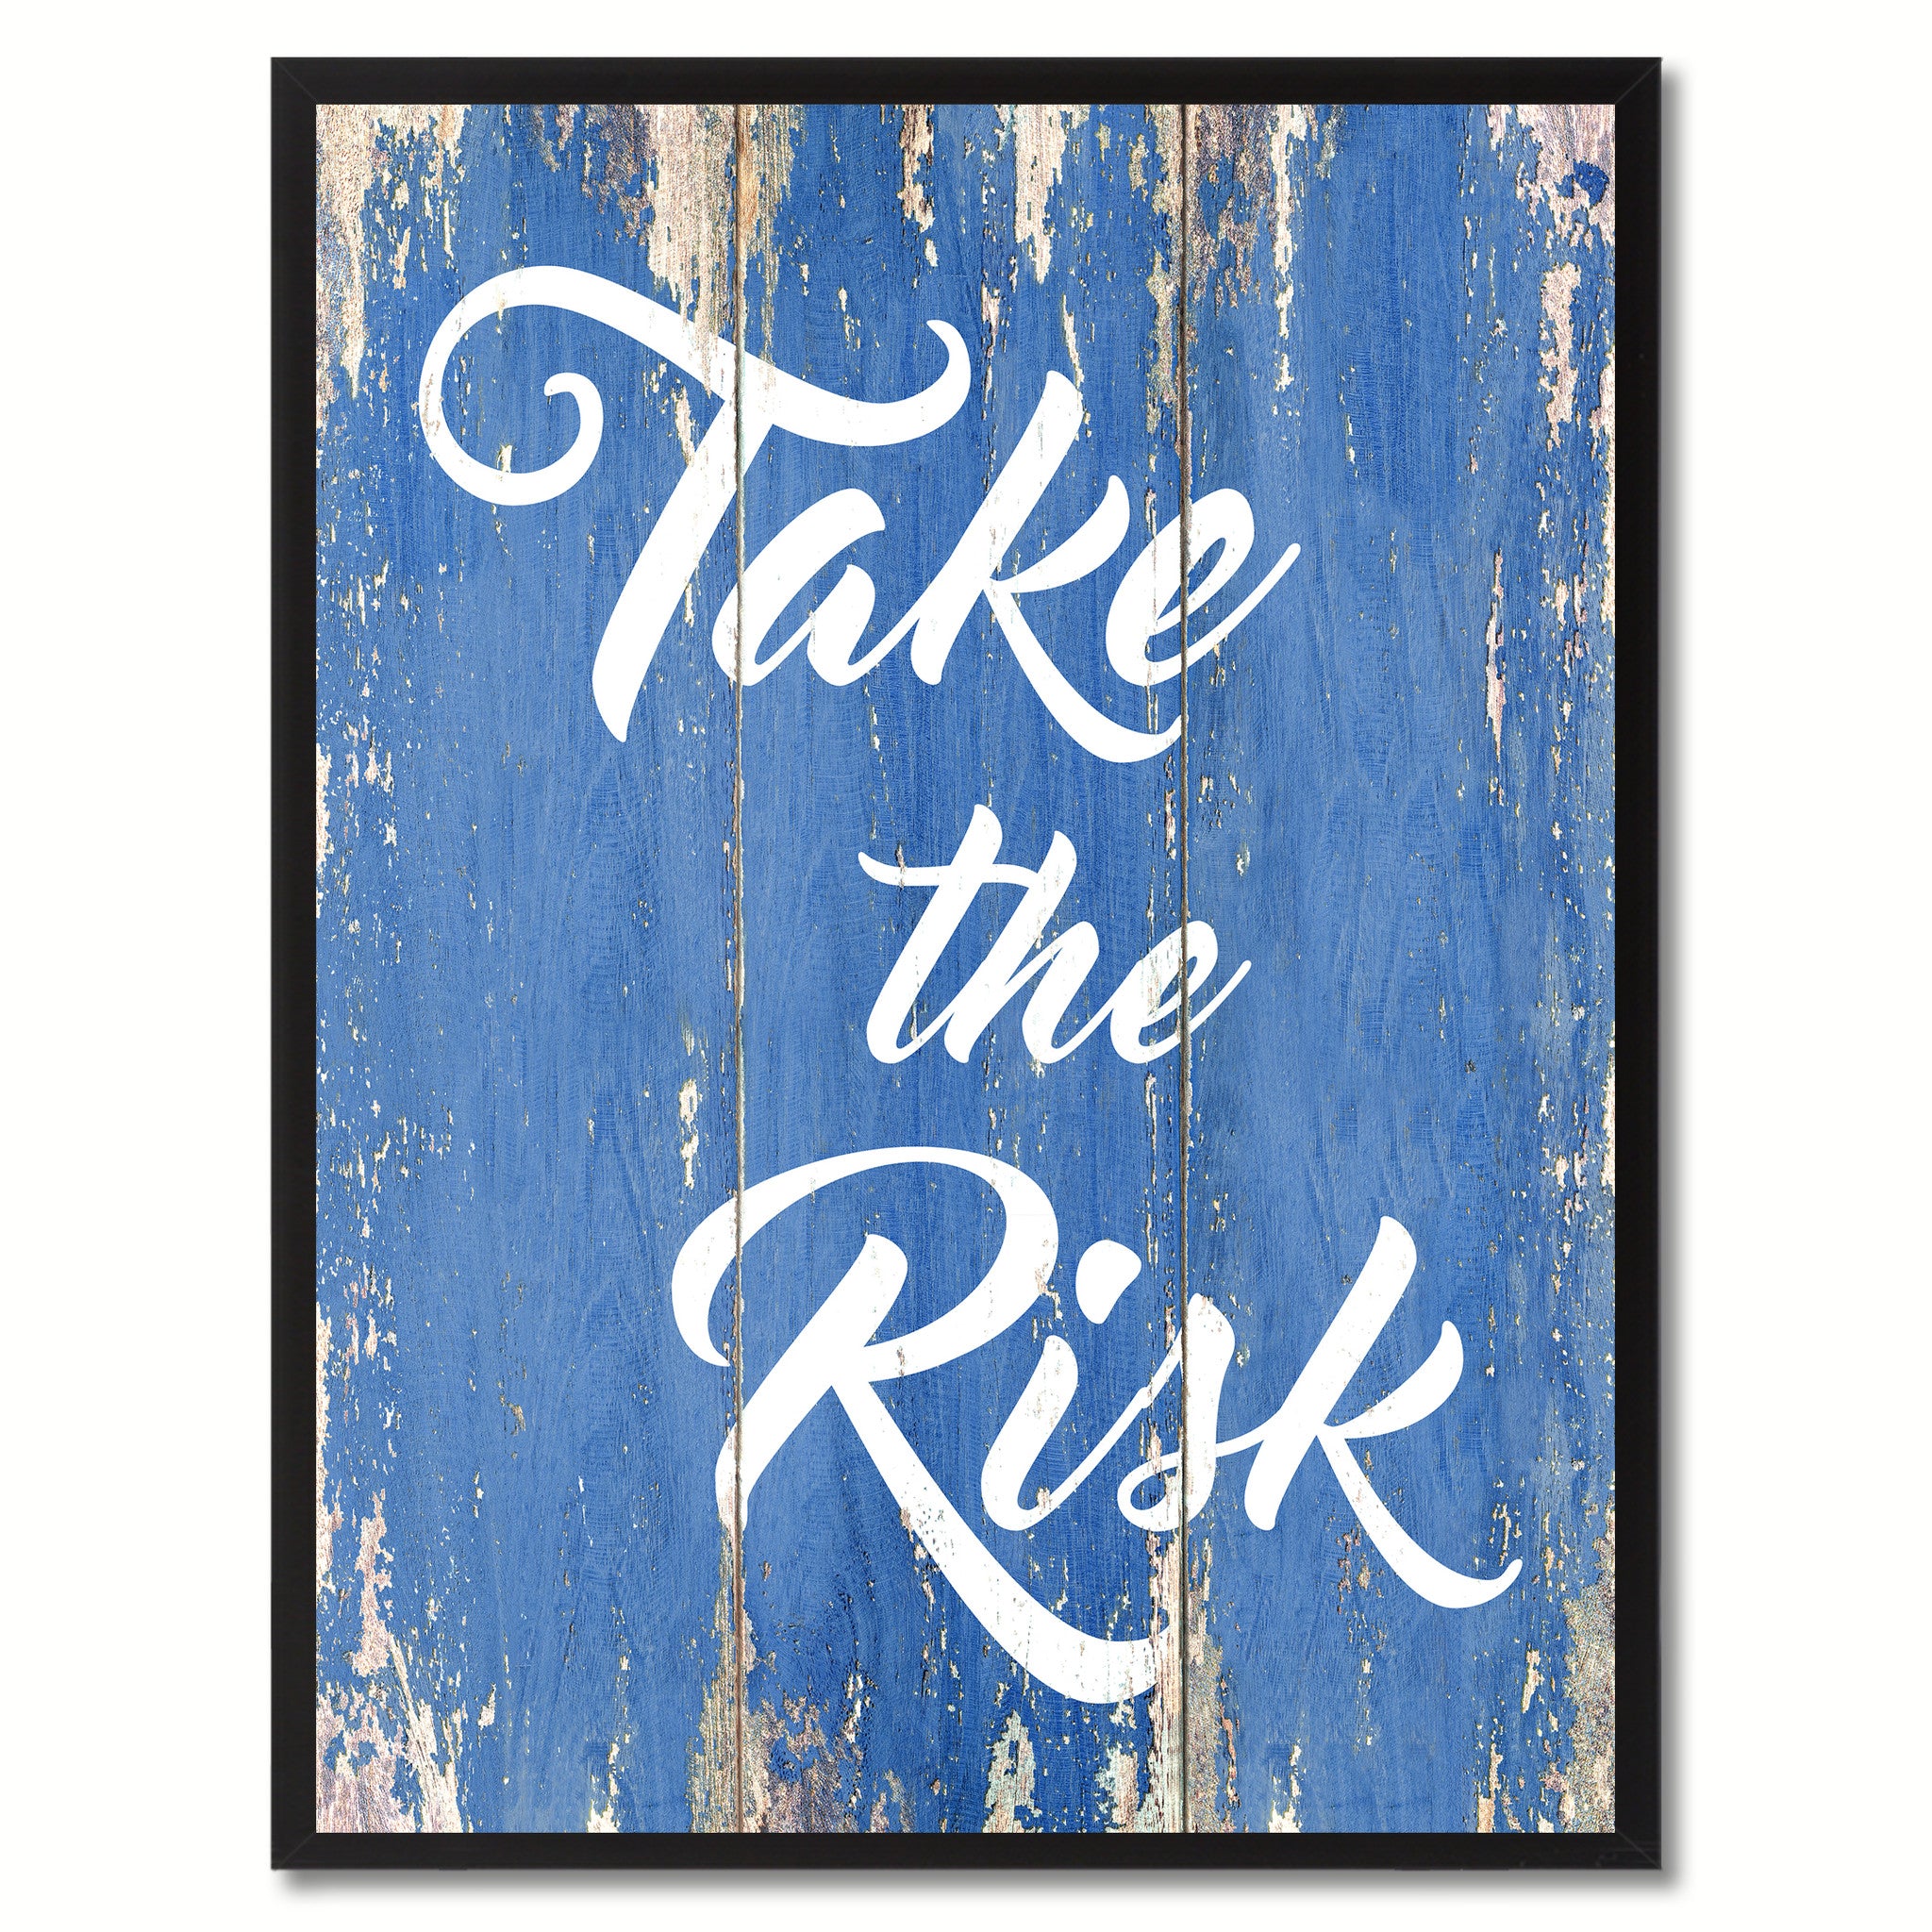 Take The Risk Saying Canvas Print, Black Picture Frame Home Decor Wall Art Gifts